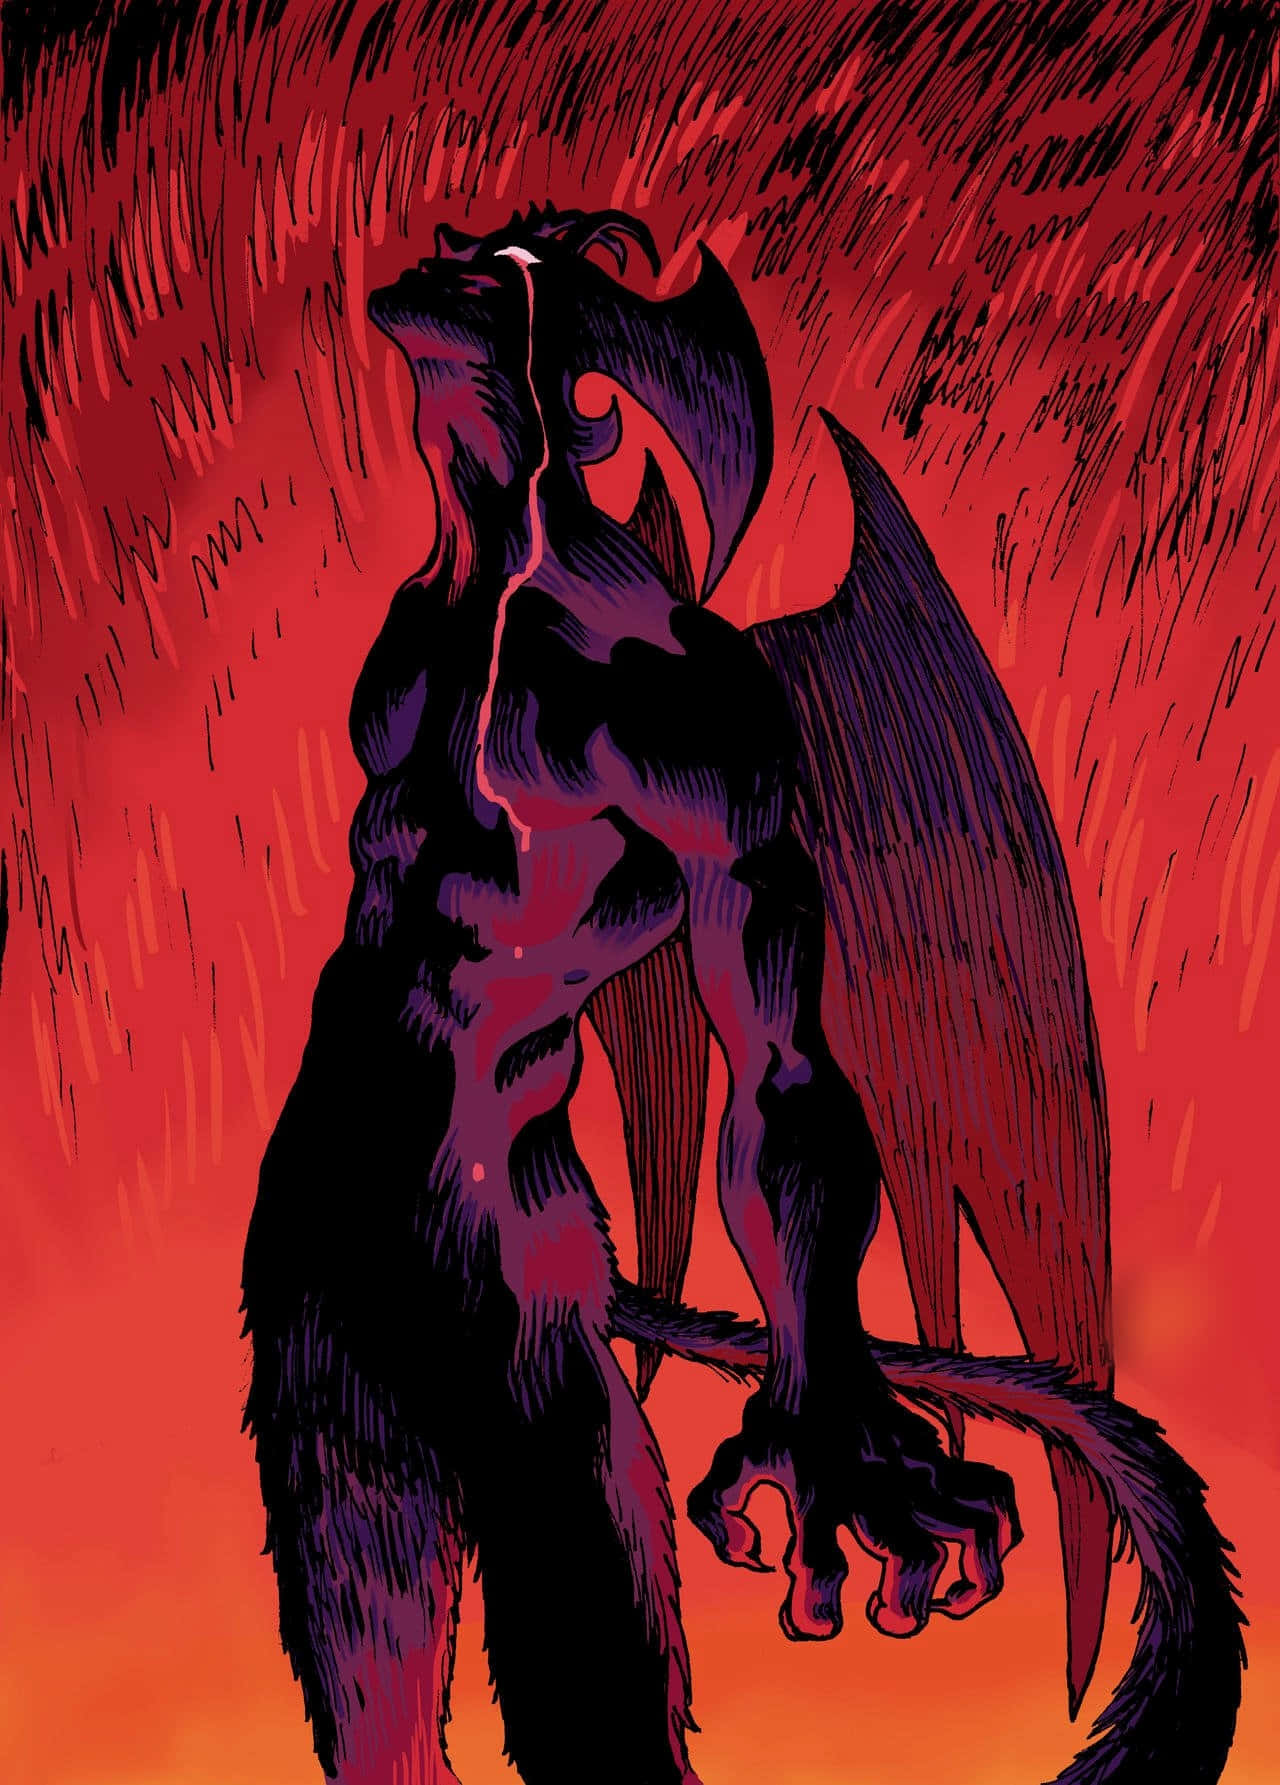 Amon unleashes powerful attacks against his opponents in Devilman Crybaby!